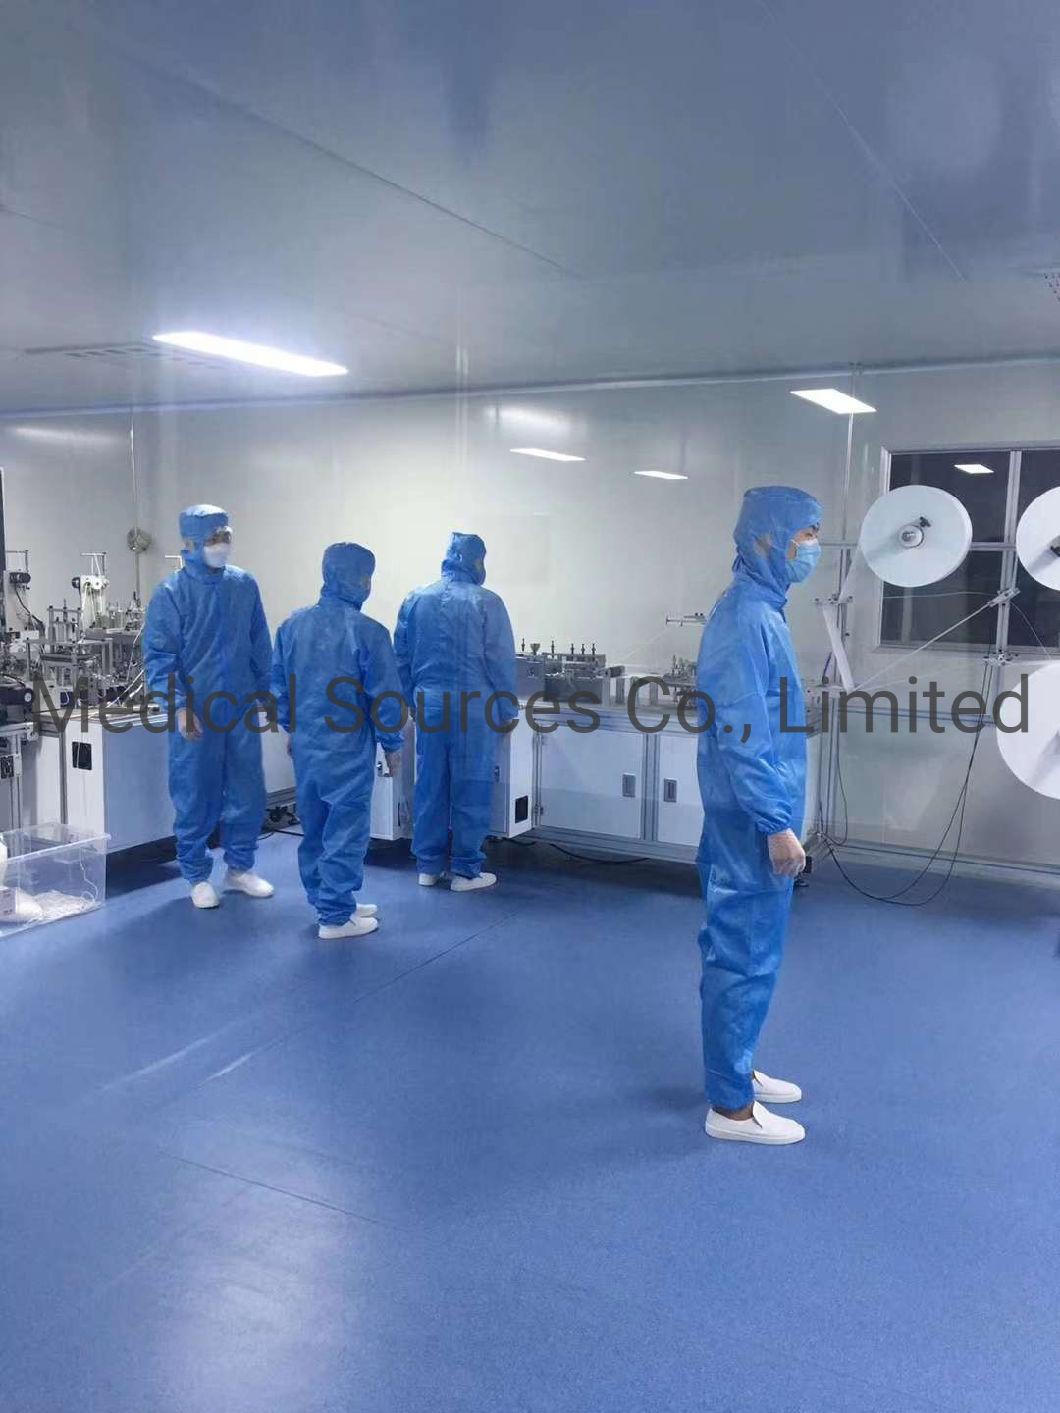 Surgical/Hospital/Medical/Protective/Safety/Nonwoven Face Mask with ISO Certificate